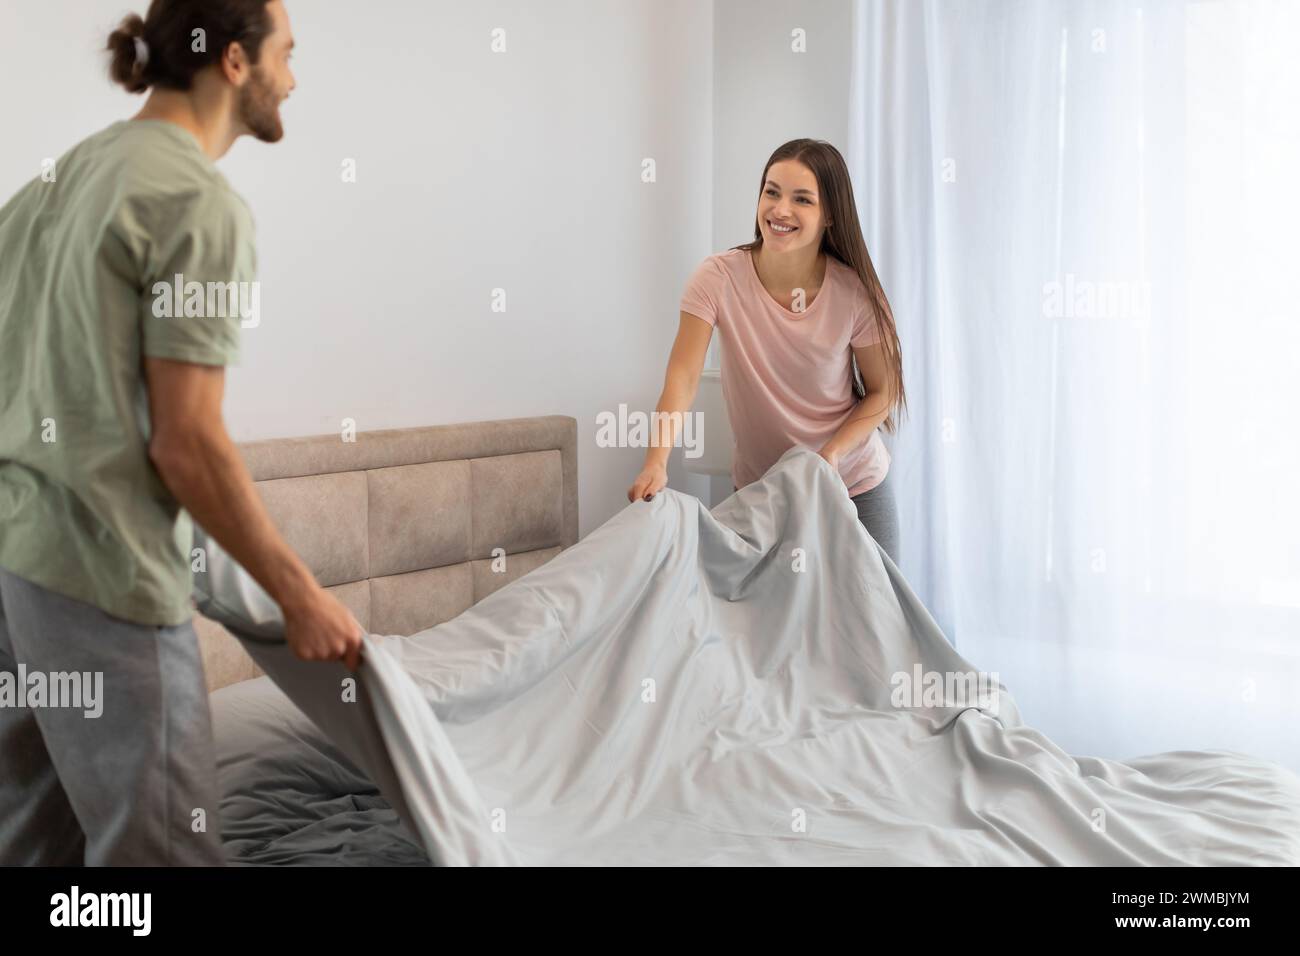 Happy young couple making bed together, teamwork Stock Photo